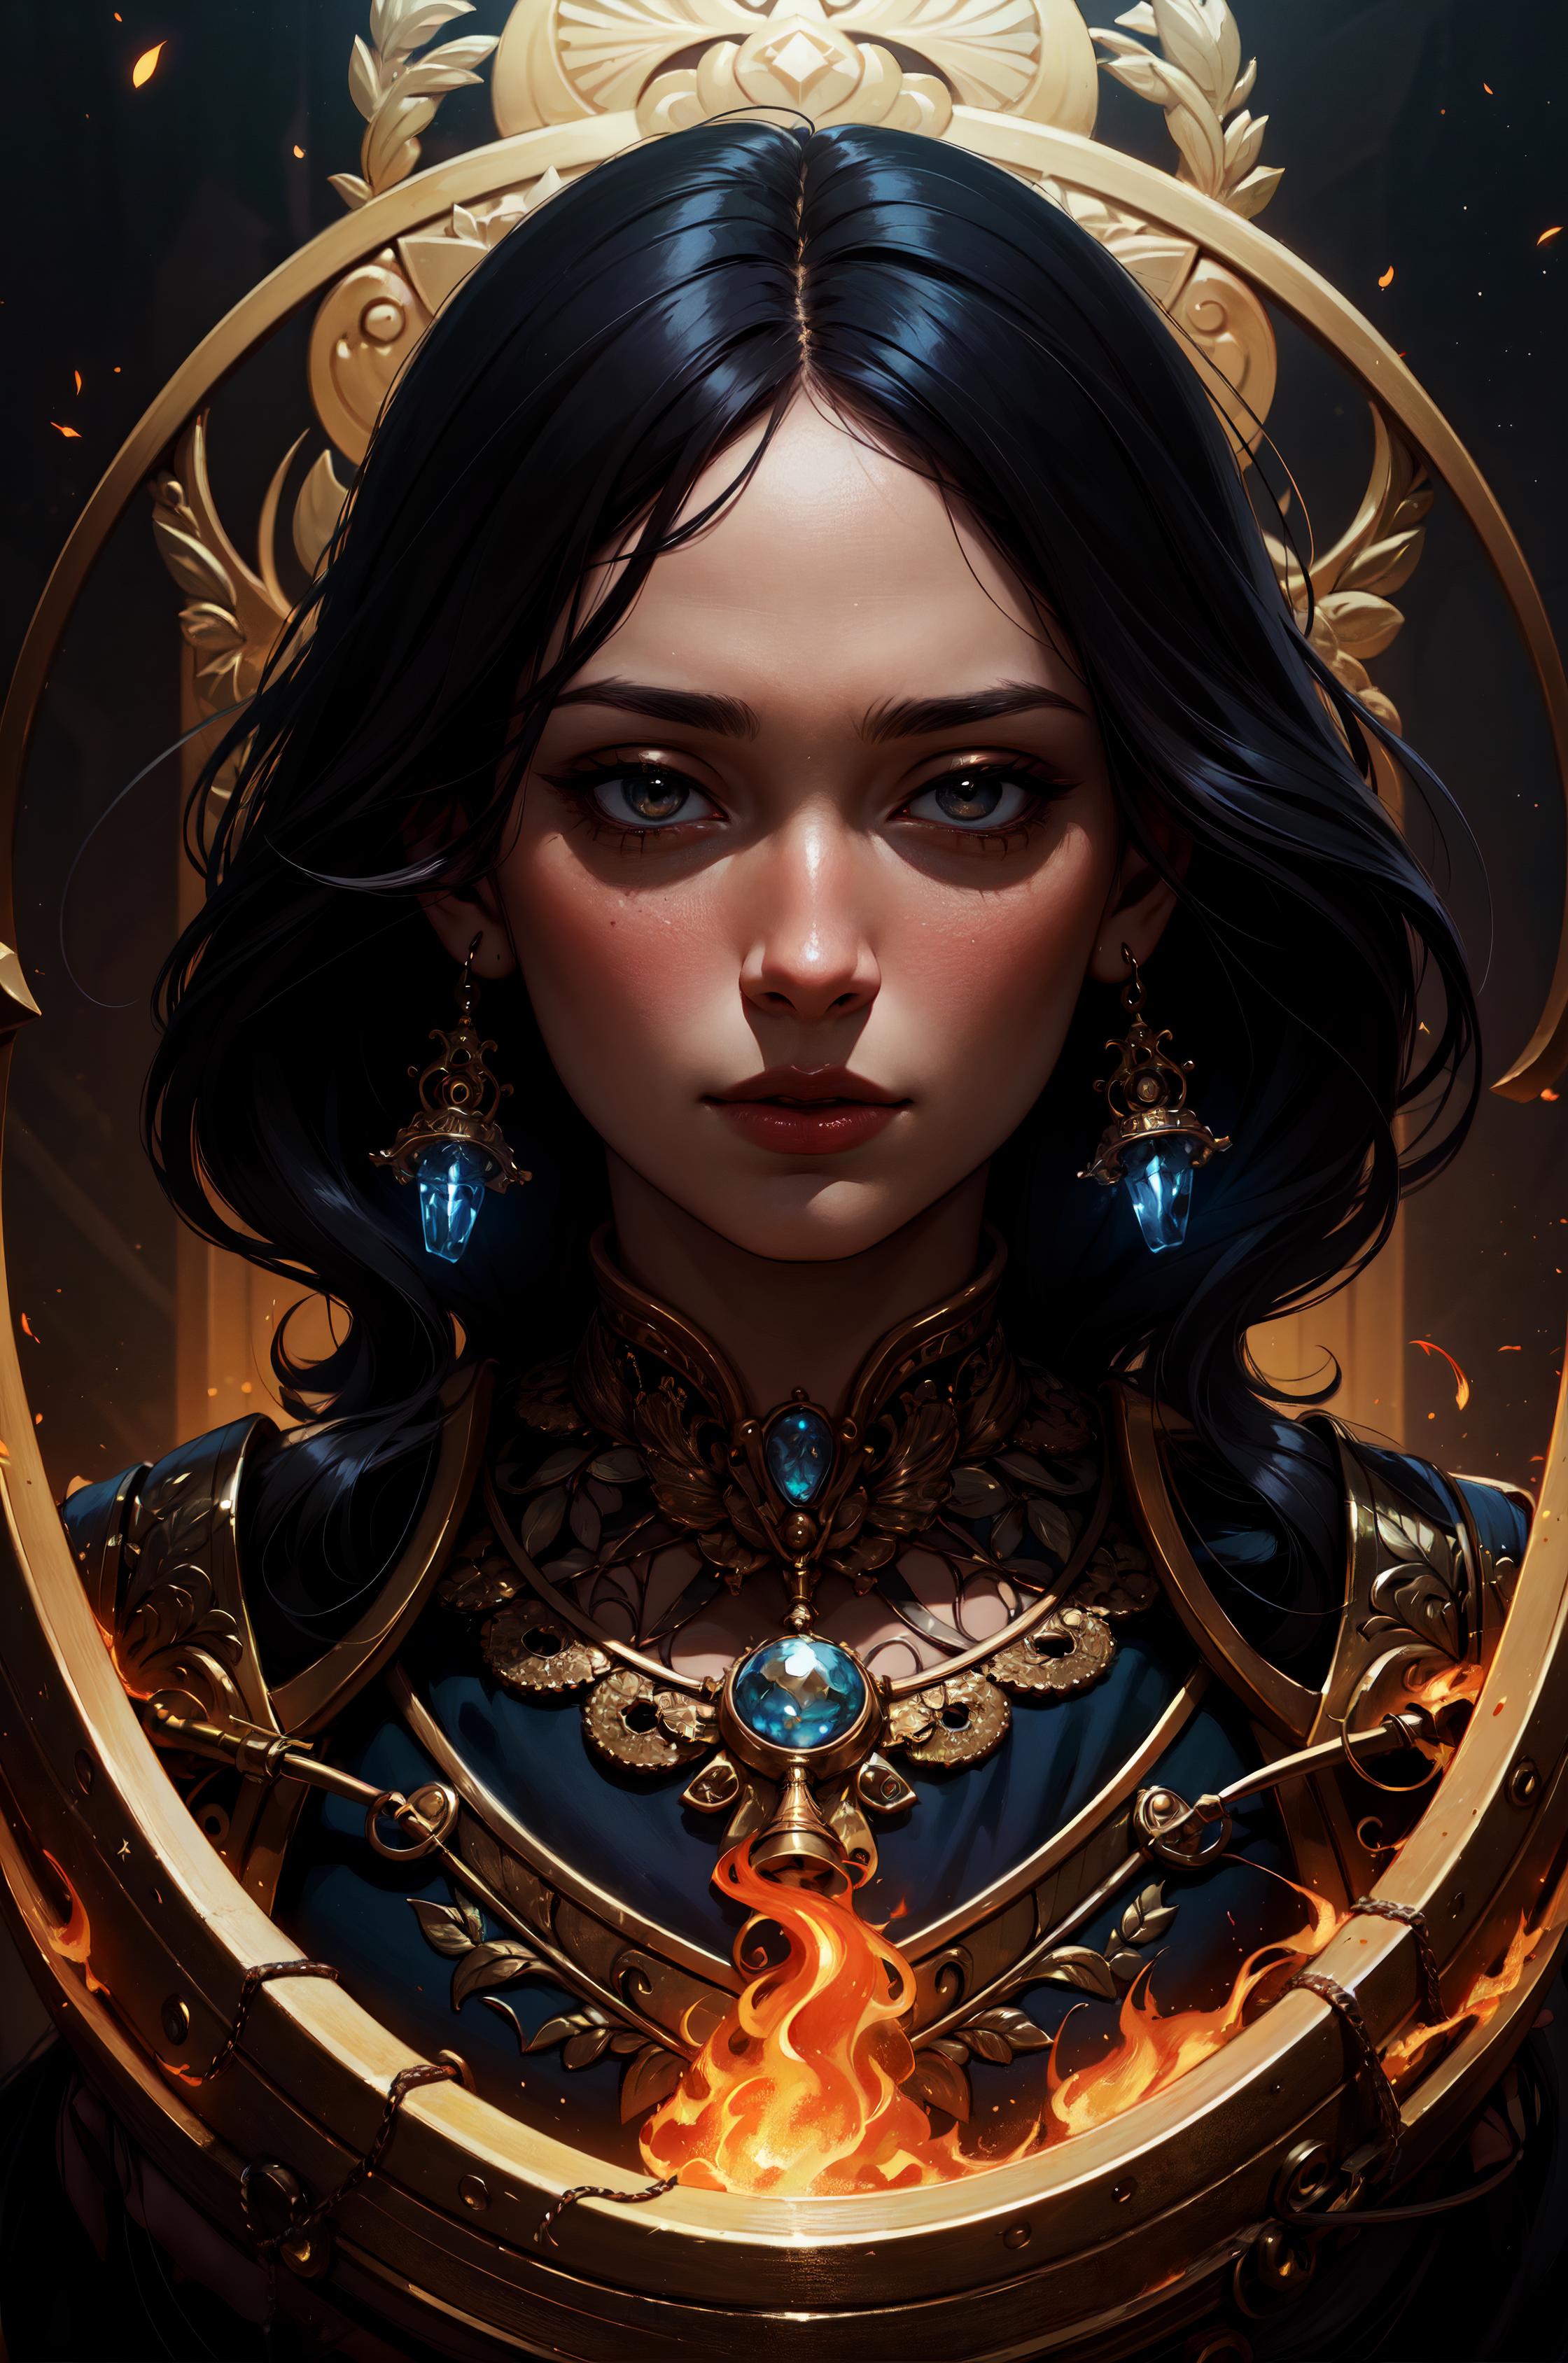 A dark-haired woman with blue eyes wearing a gold crown and jewelry, possibly an elf queen.